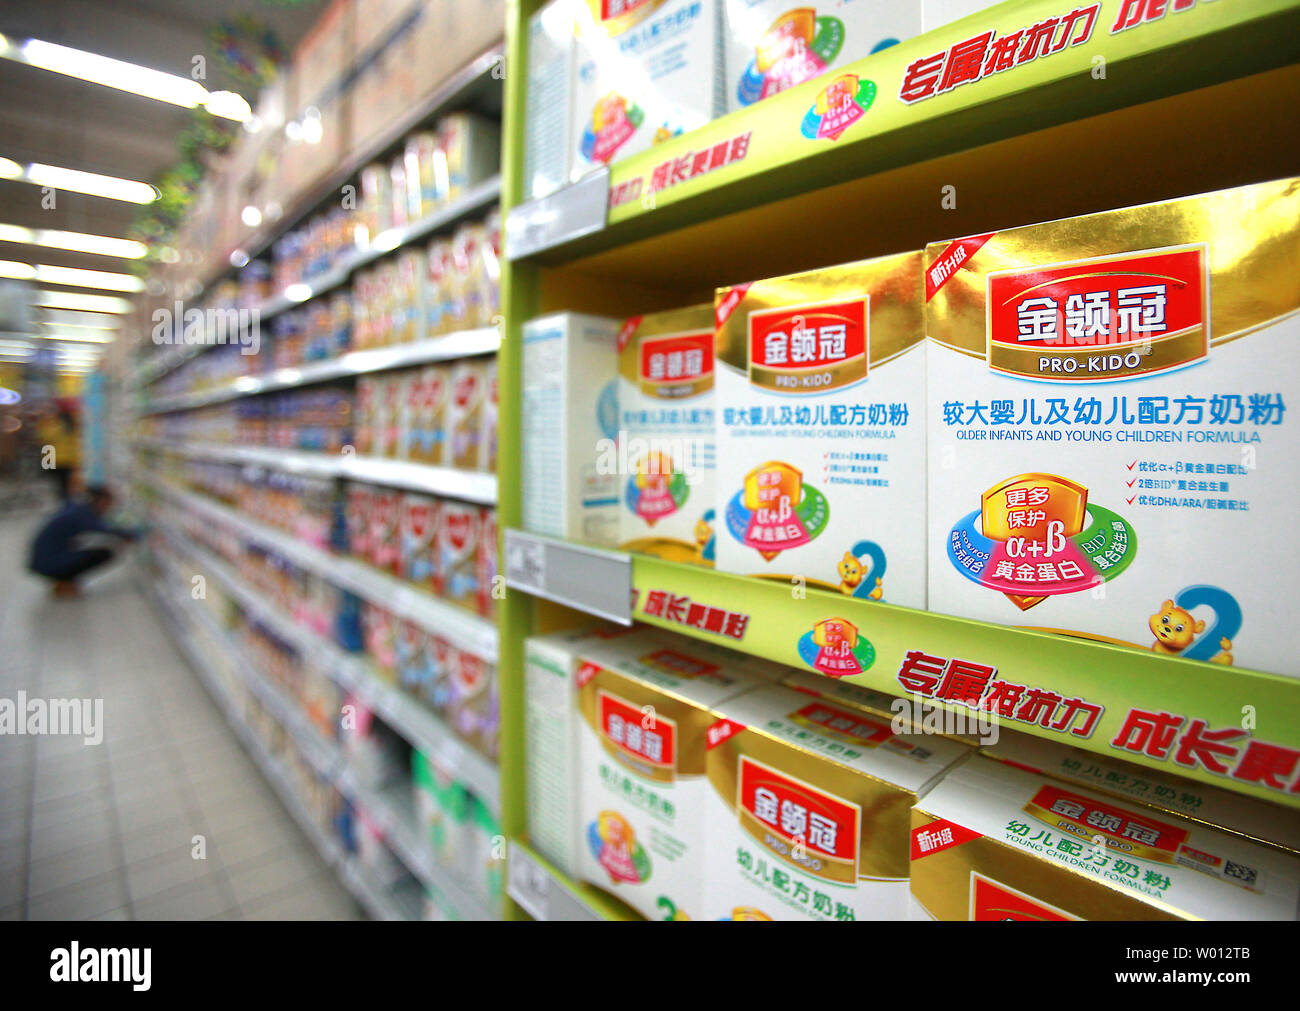 An international supermarket sells baby formula in downtown Beijing on April 9, 2013.  Retailers in Britain are rationing sales of baby formula because of a surge in demand for foreign-made milk in China due to domestic fears of contaminated Chinese products.     UPI/Stephen shaver Stock Photo